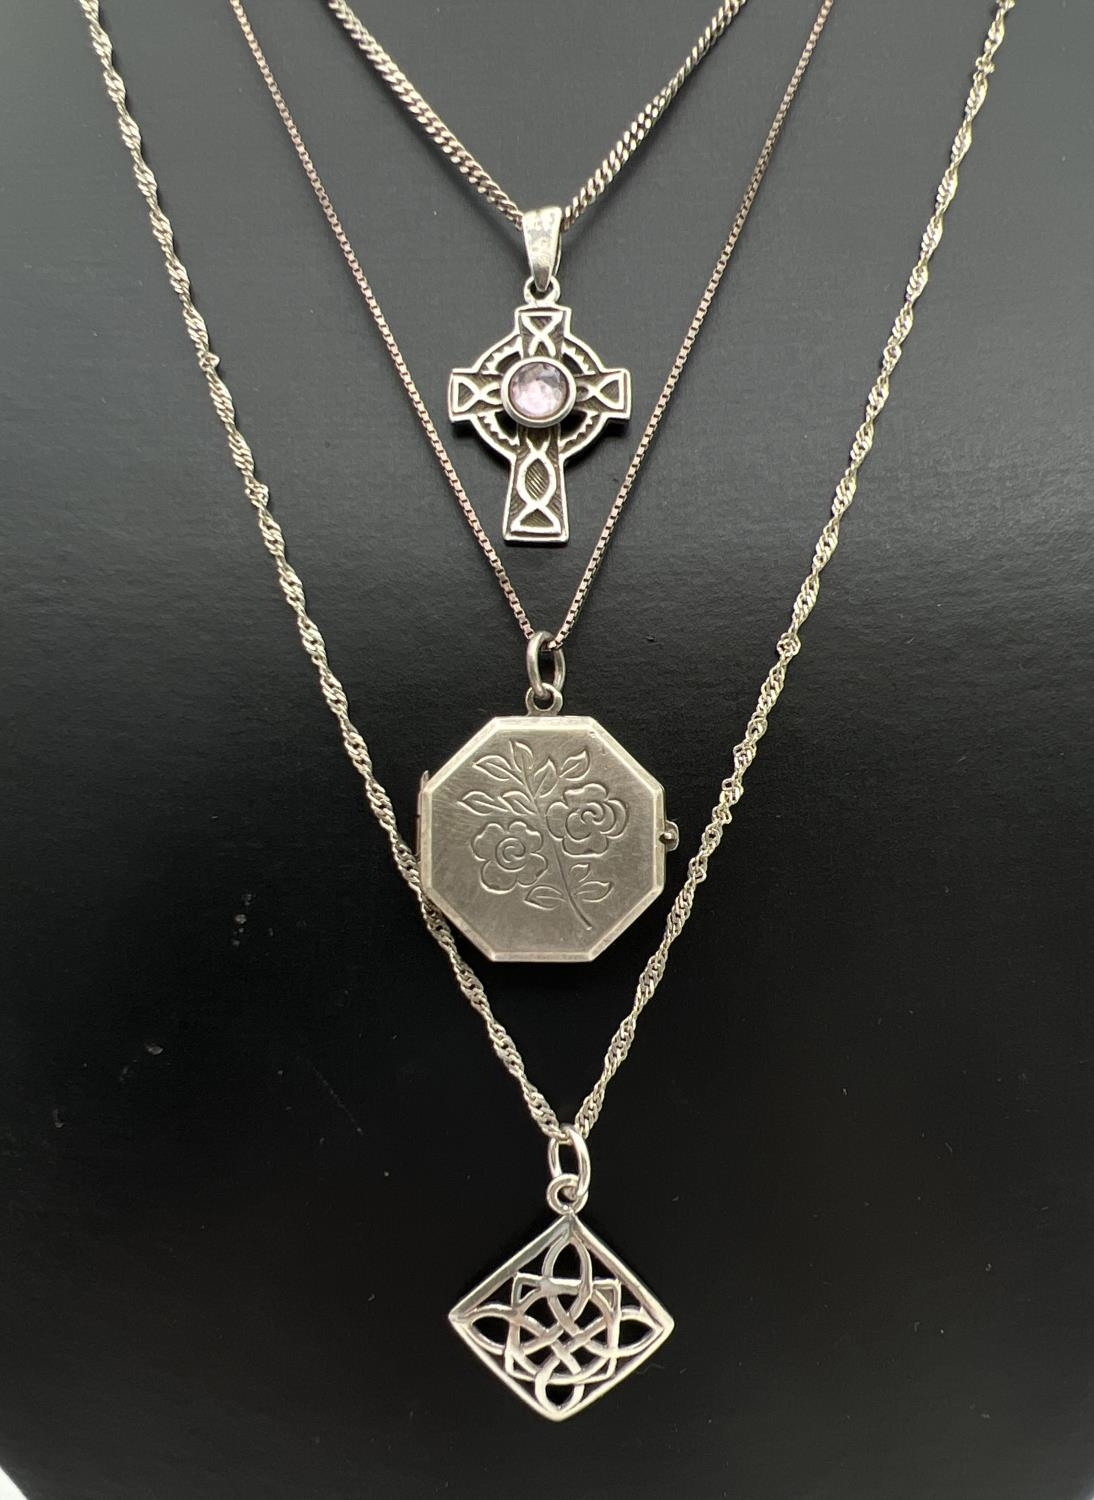 3 silver and white metal pendant necklaces. An 18" fine box chain with vintage white metal octagonal